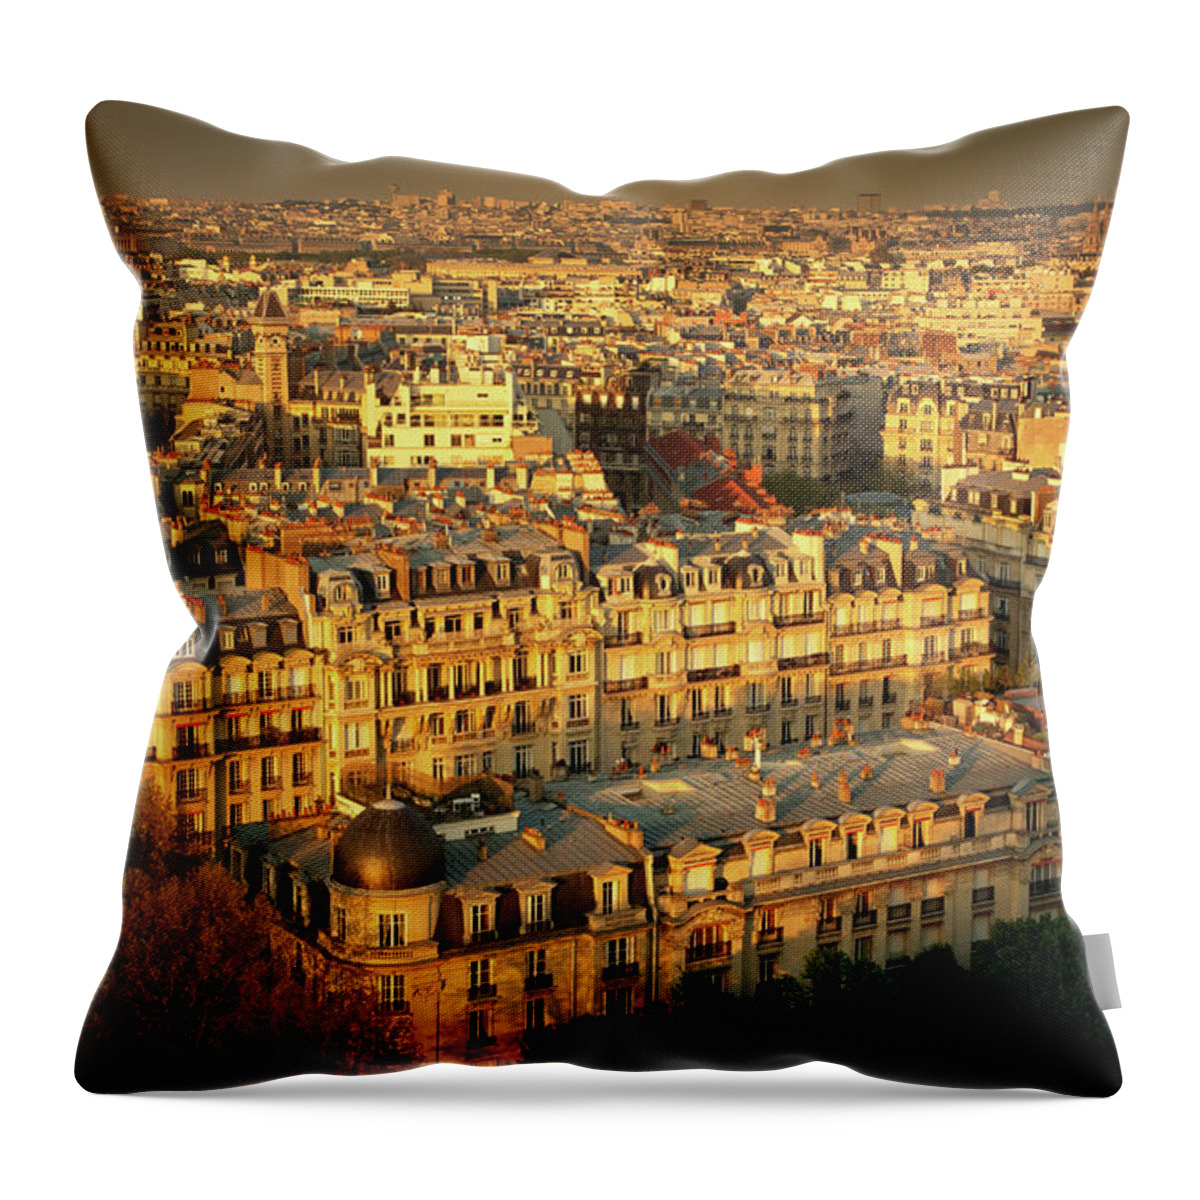 Scenics Throw Pillow featuring the photograph Aerial View Of Paris by Nikada